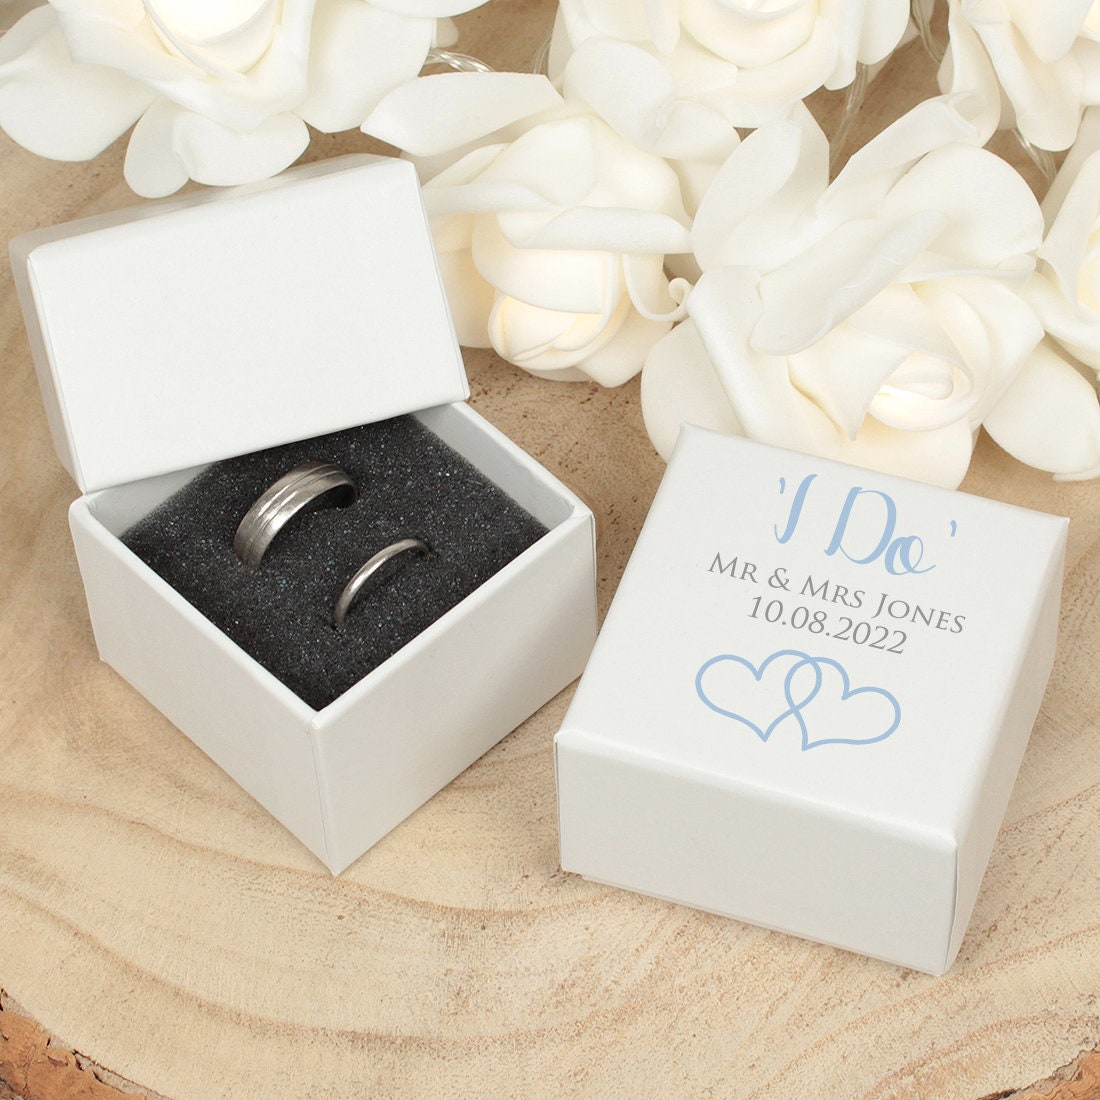 Wedding Ring Party Favors